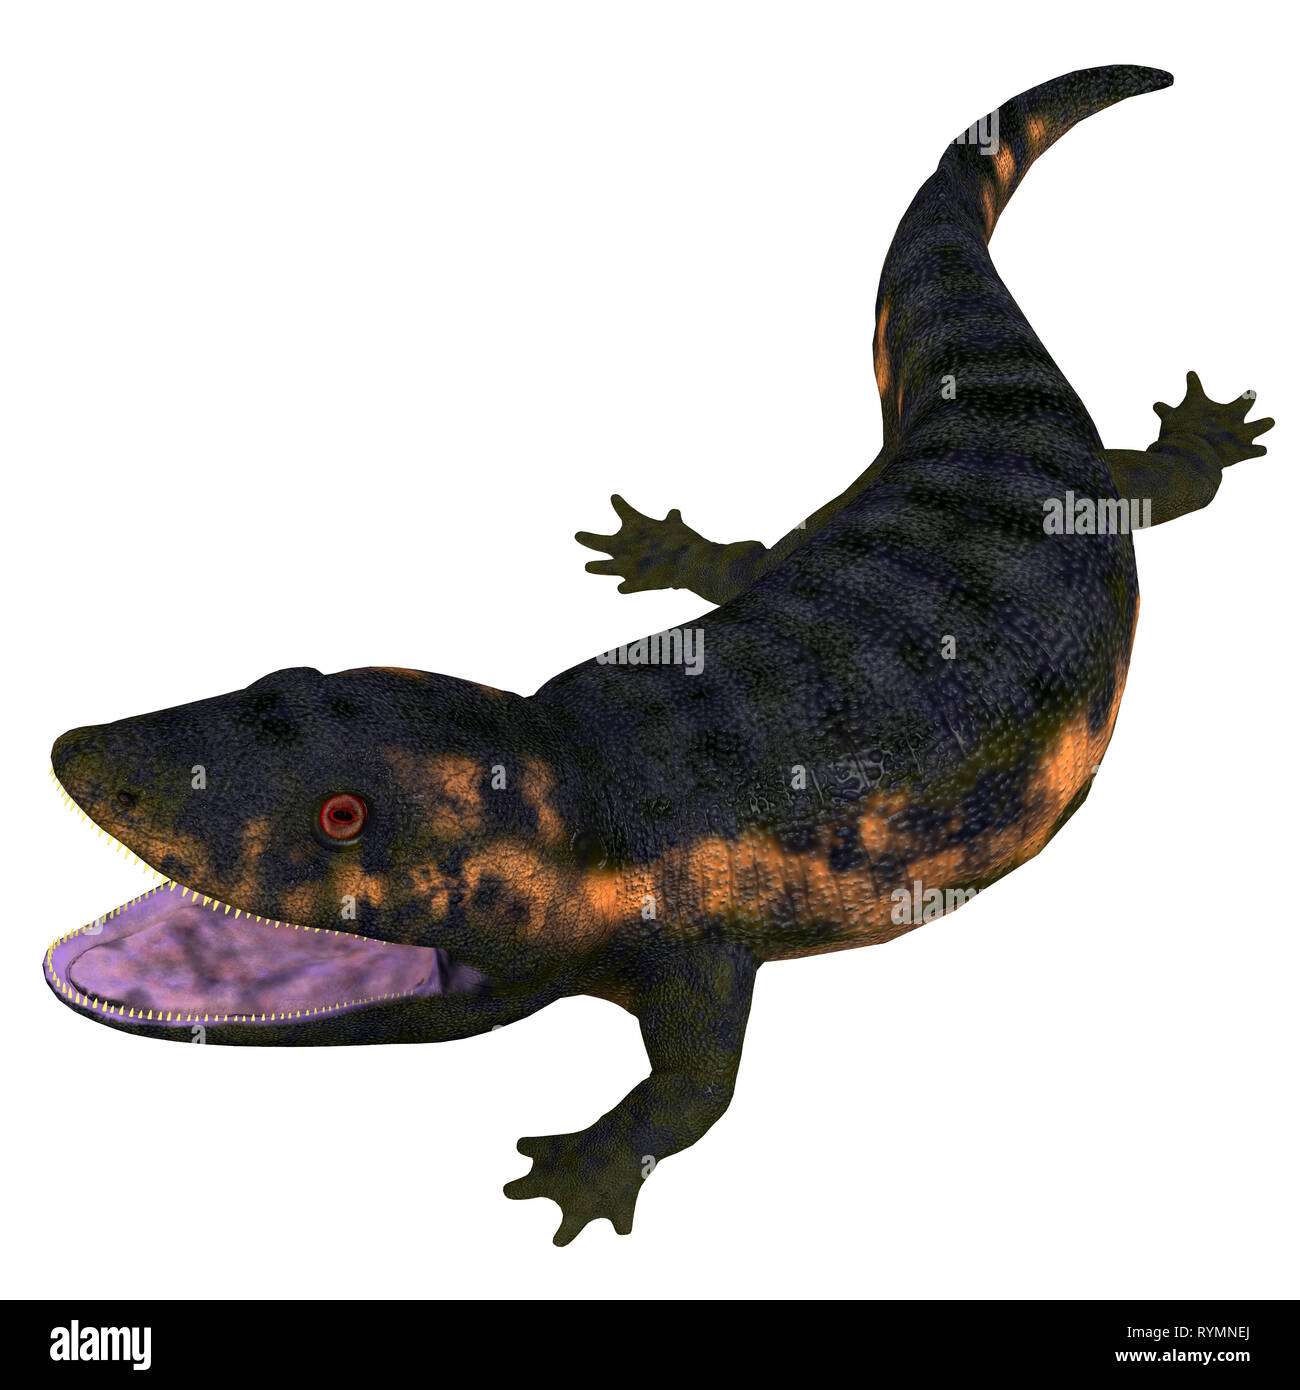 Dendrerpeton Amphibian Head - Dendrerpeton was a carnivorous amphibian animal that lived in Canada during the Carboniferous Period. Stock Photo